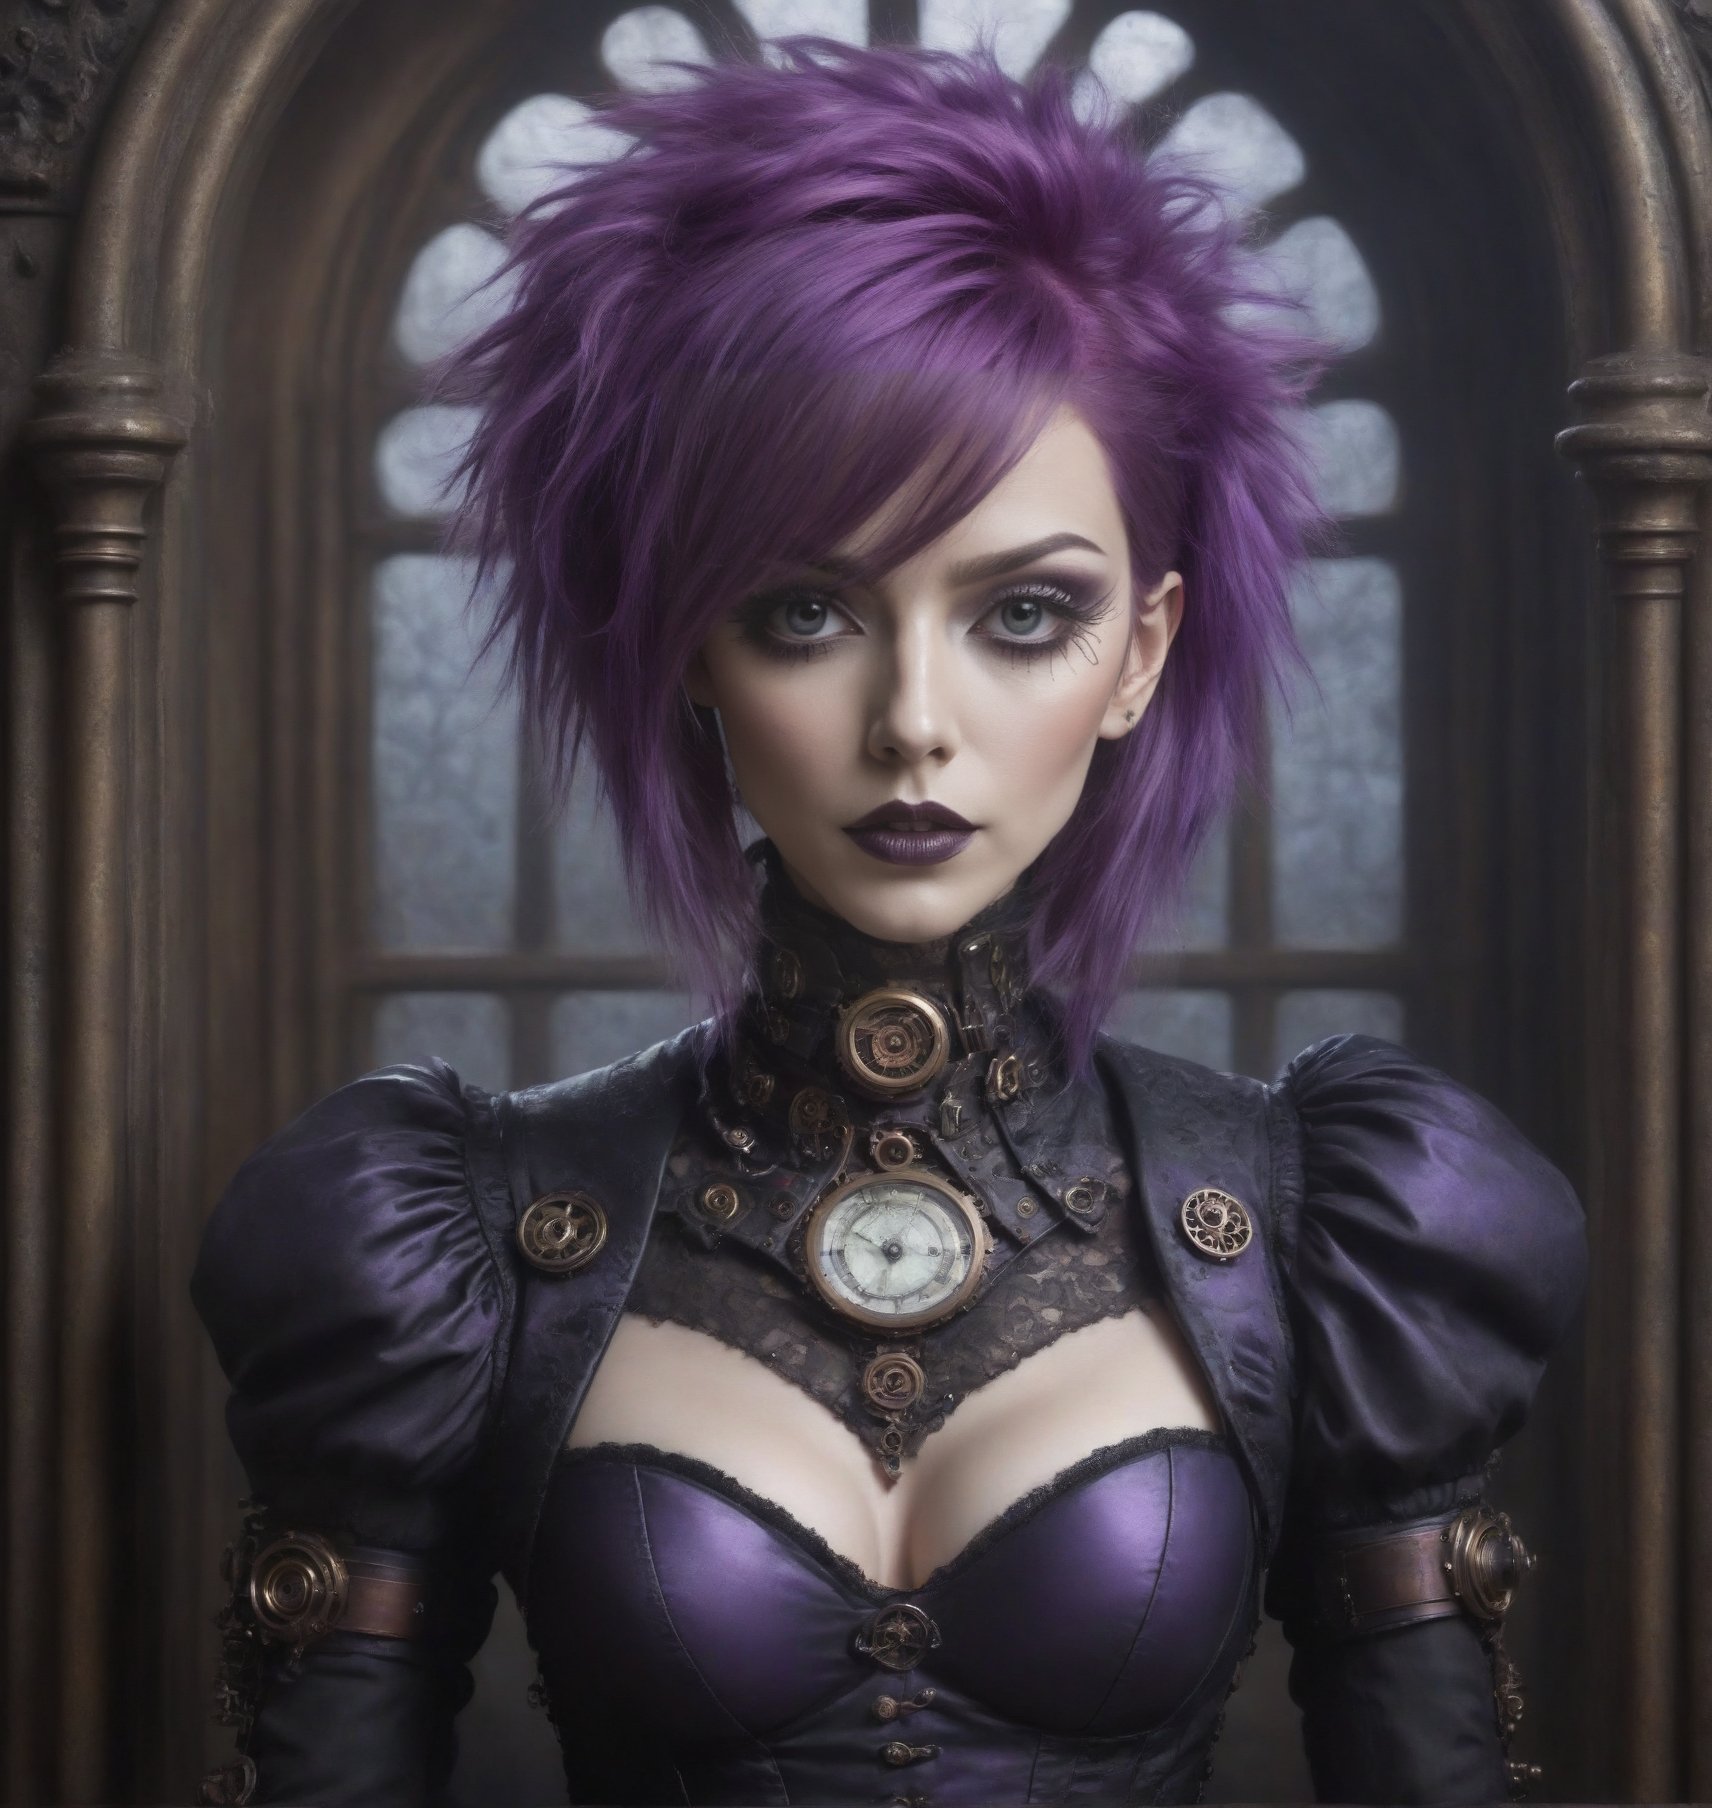 steampunk, gothic & cyborg combination, with purple hair, ornate surroundings, victorian era, unique looking,goth person,c1bo